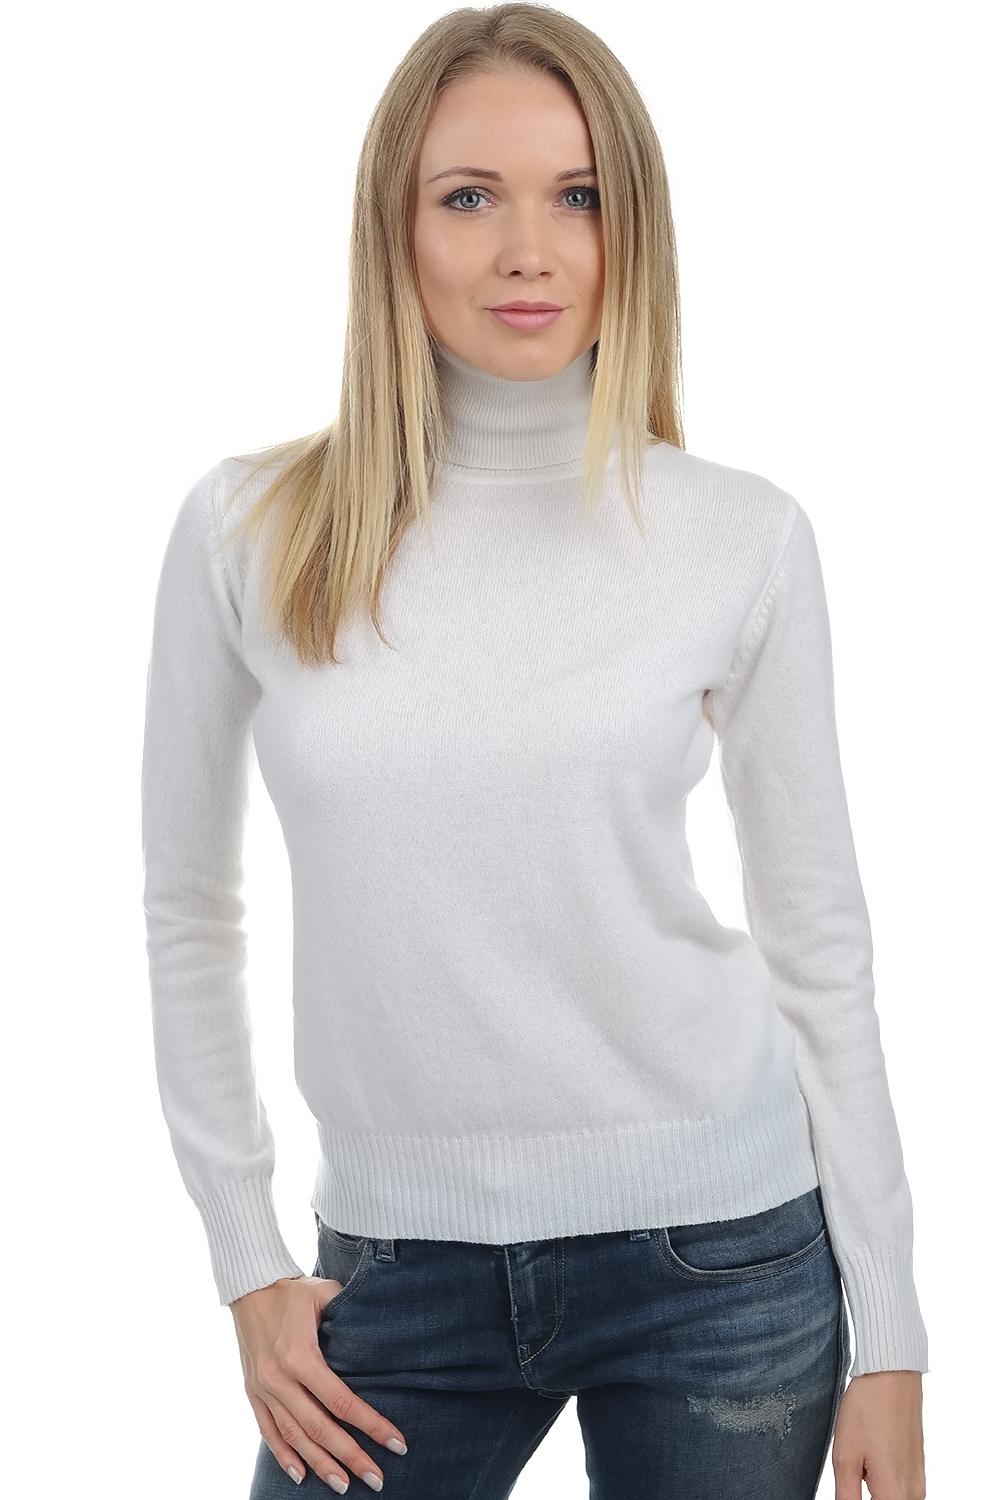 Cachemire pull femme col roule lili blanc casse s